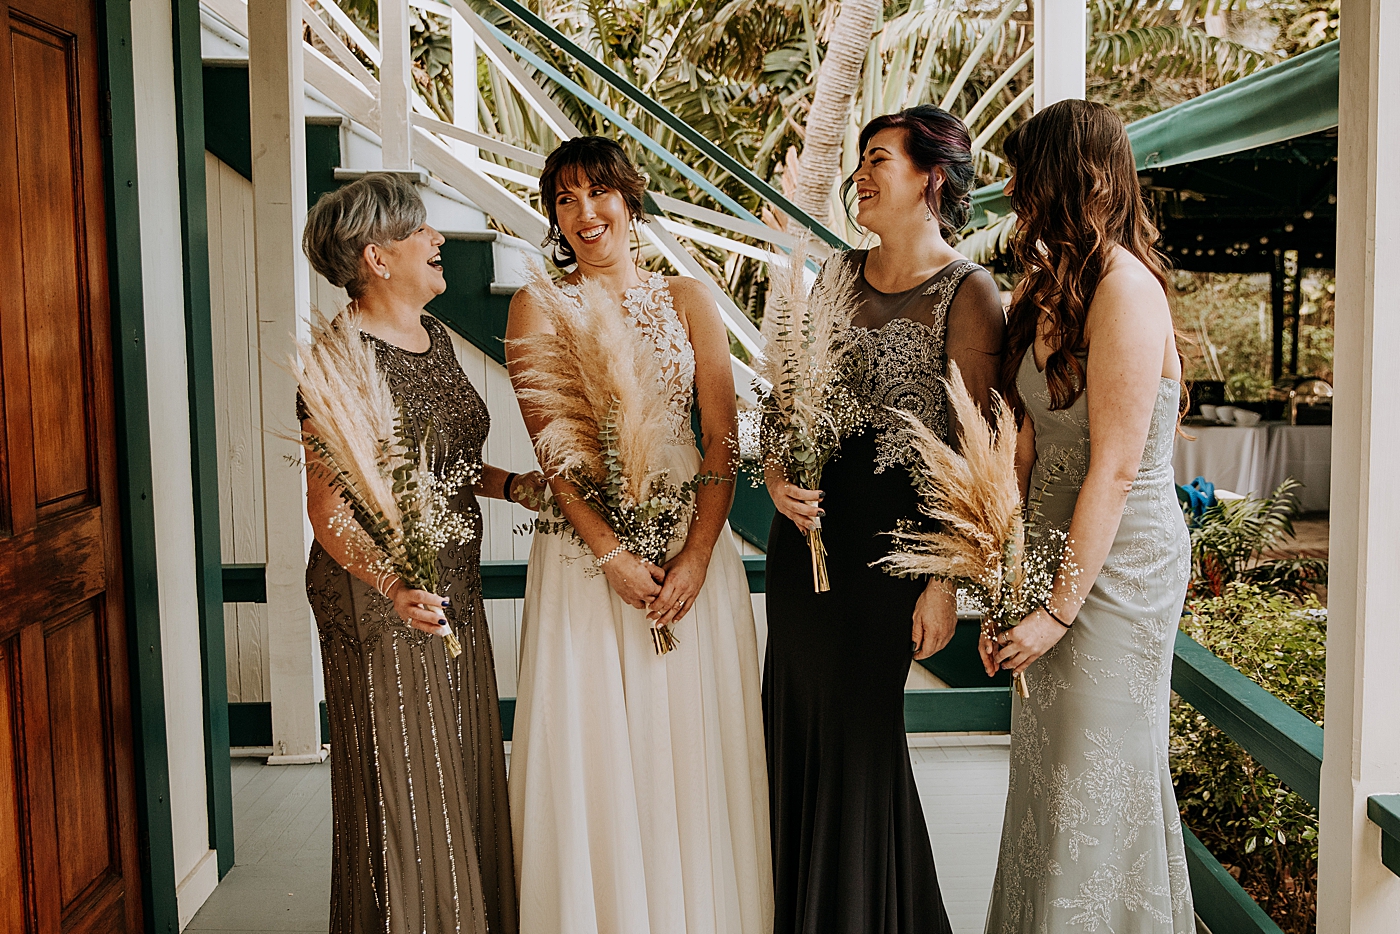 Bride with family and Bridesmaids Historic Stranahan House Wedding Photography captured by South Florida Wedding Photographer Maggie Alvarez Photography